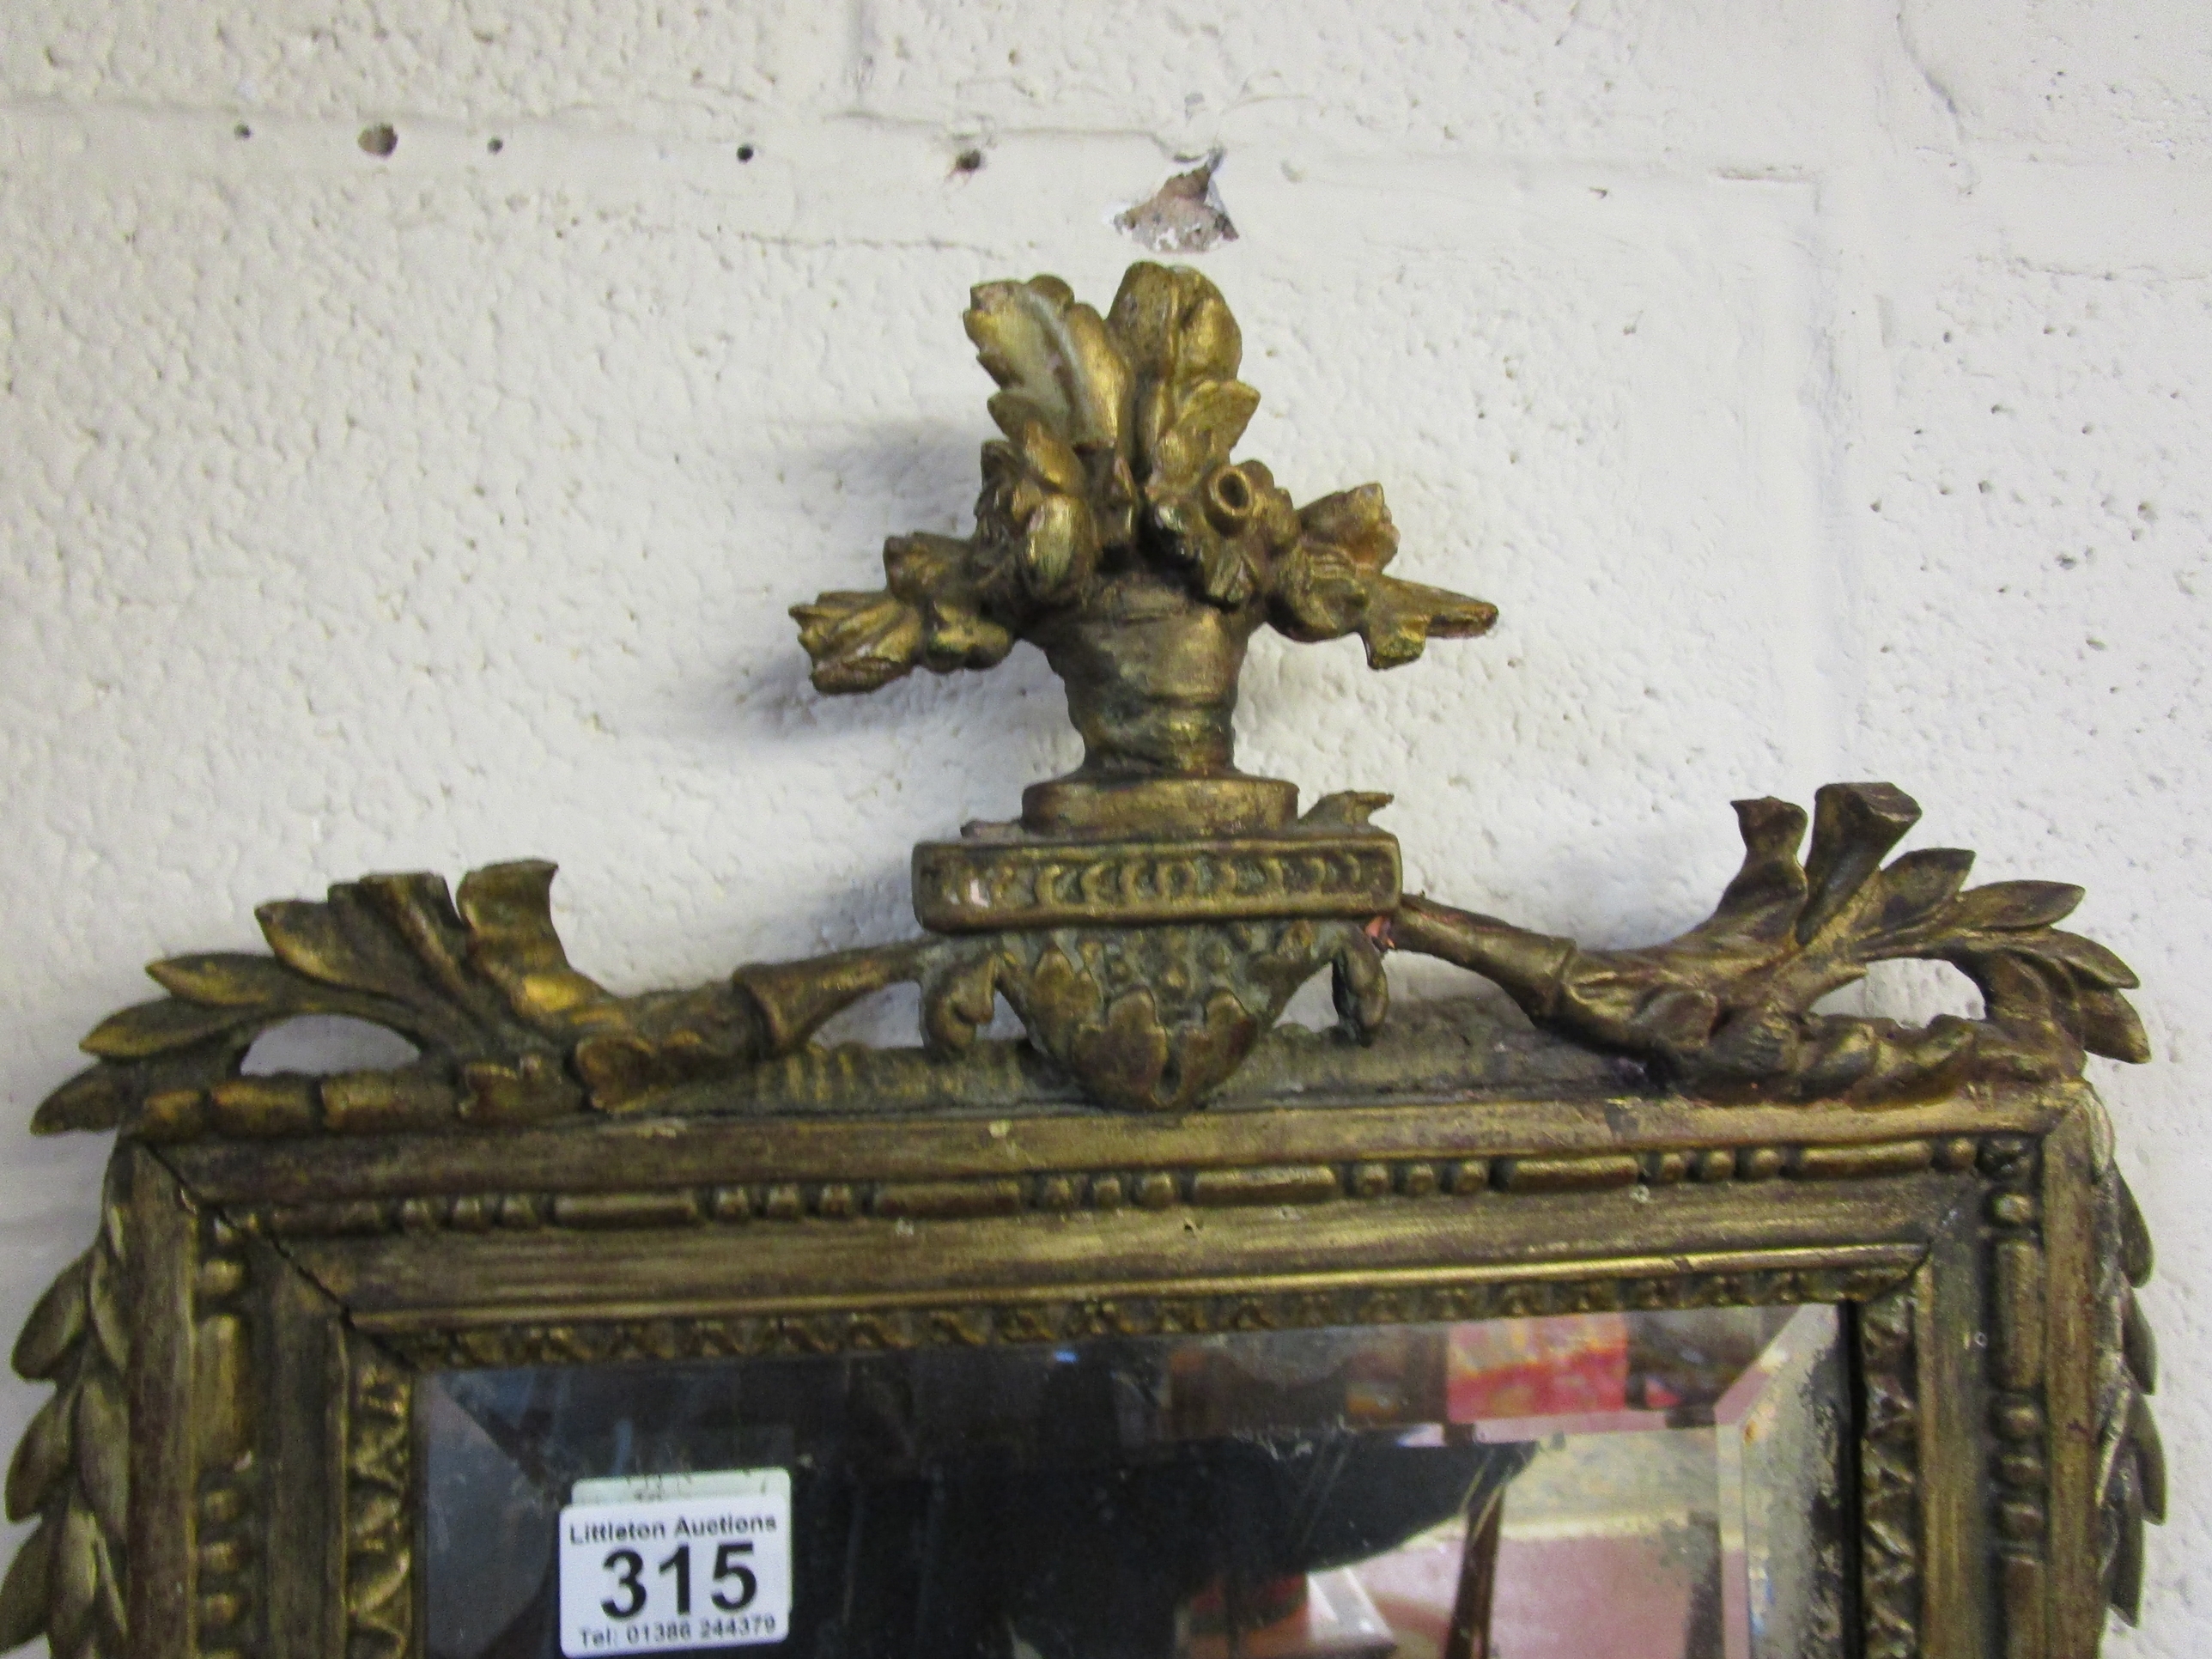 Period gilt frame bevelled glass mirror - Image 3 of 3